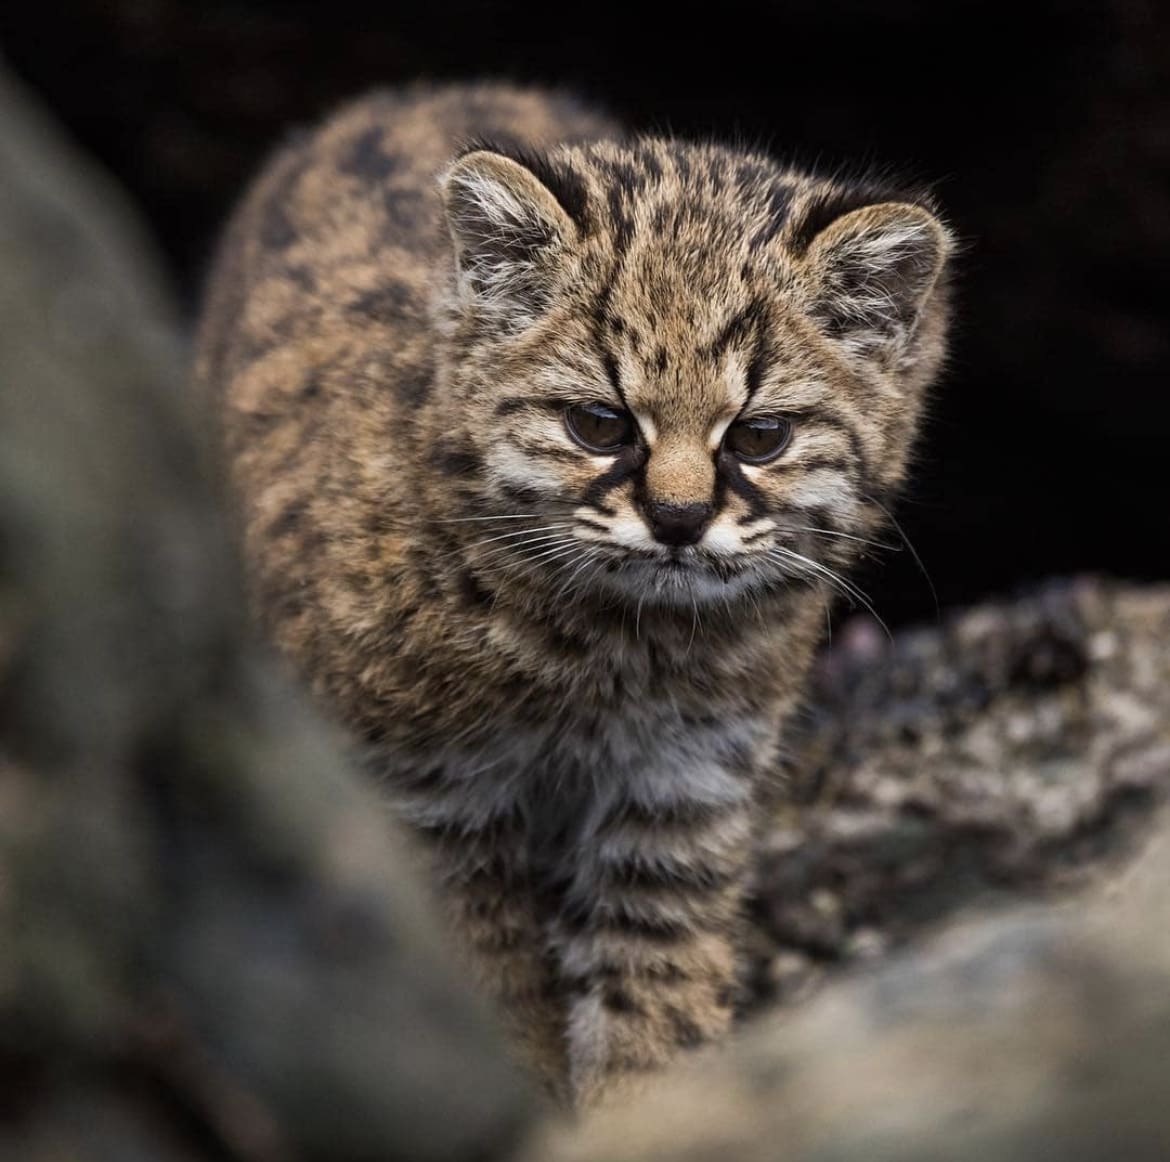 One of the smallest wild cats in south america